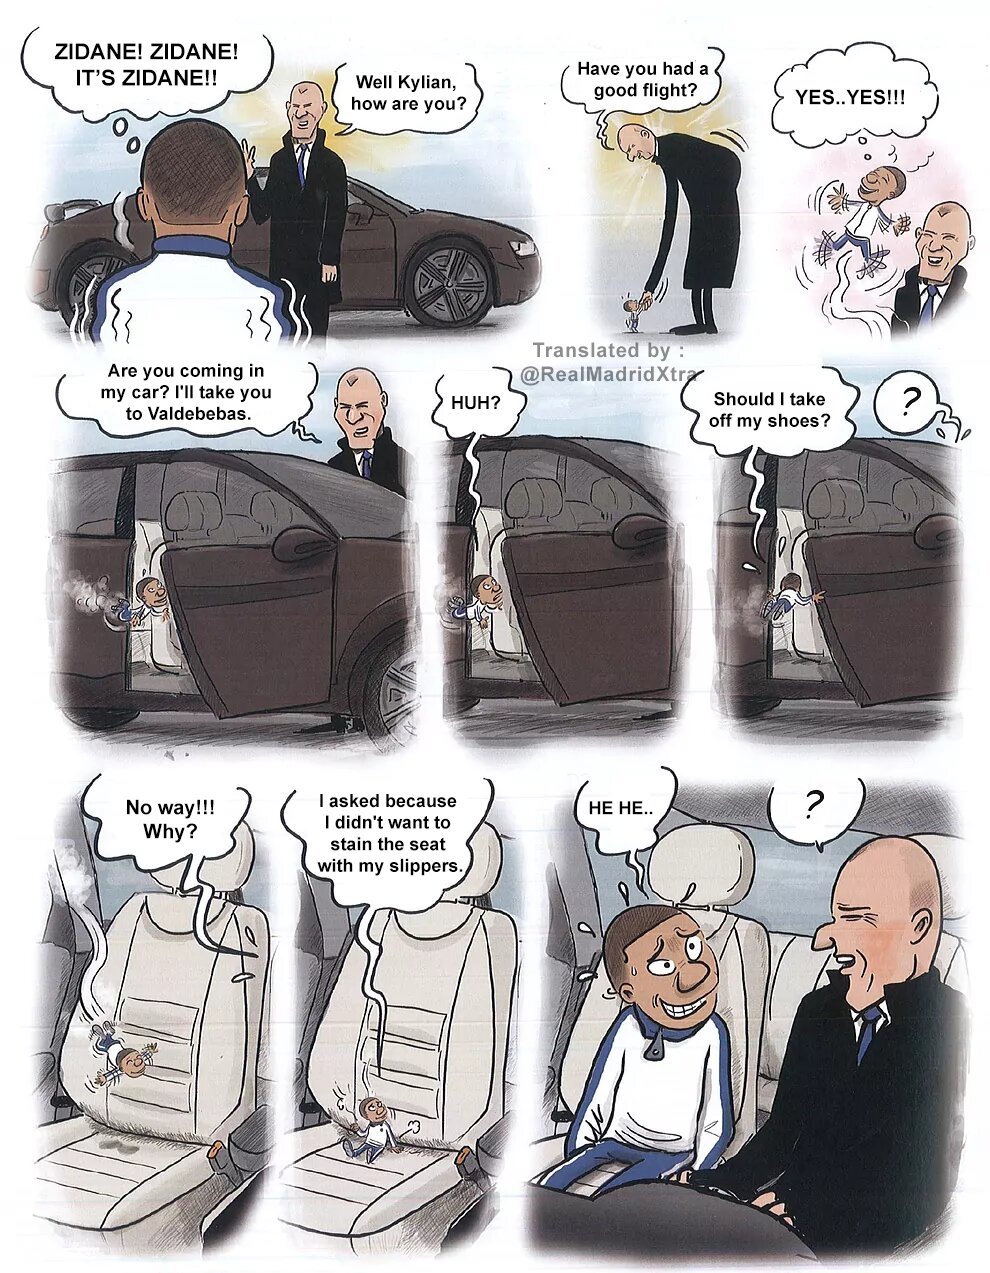 Real Madrid Xtra on X: 🔖 Here is a chapter from Kylian Mbappe's new comic  book about his life Je m'appelle Kylian in which he meets Zidane &  Cristiano Ronaldo in Madrid